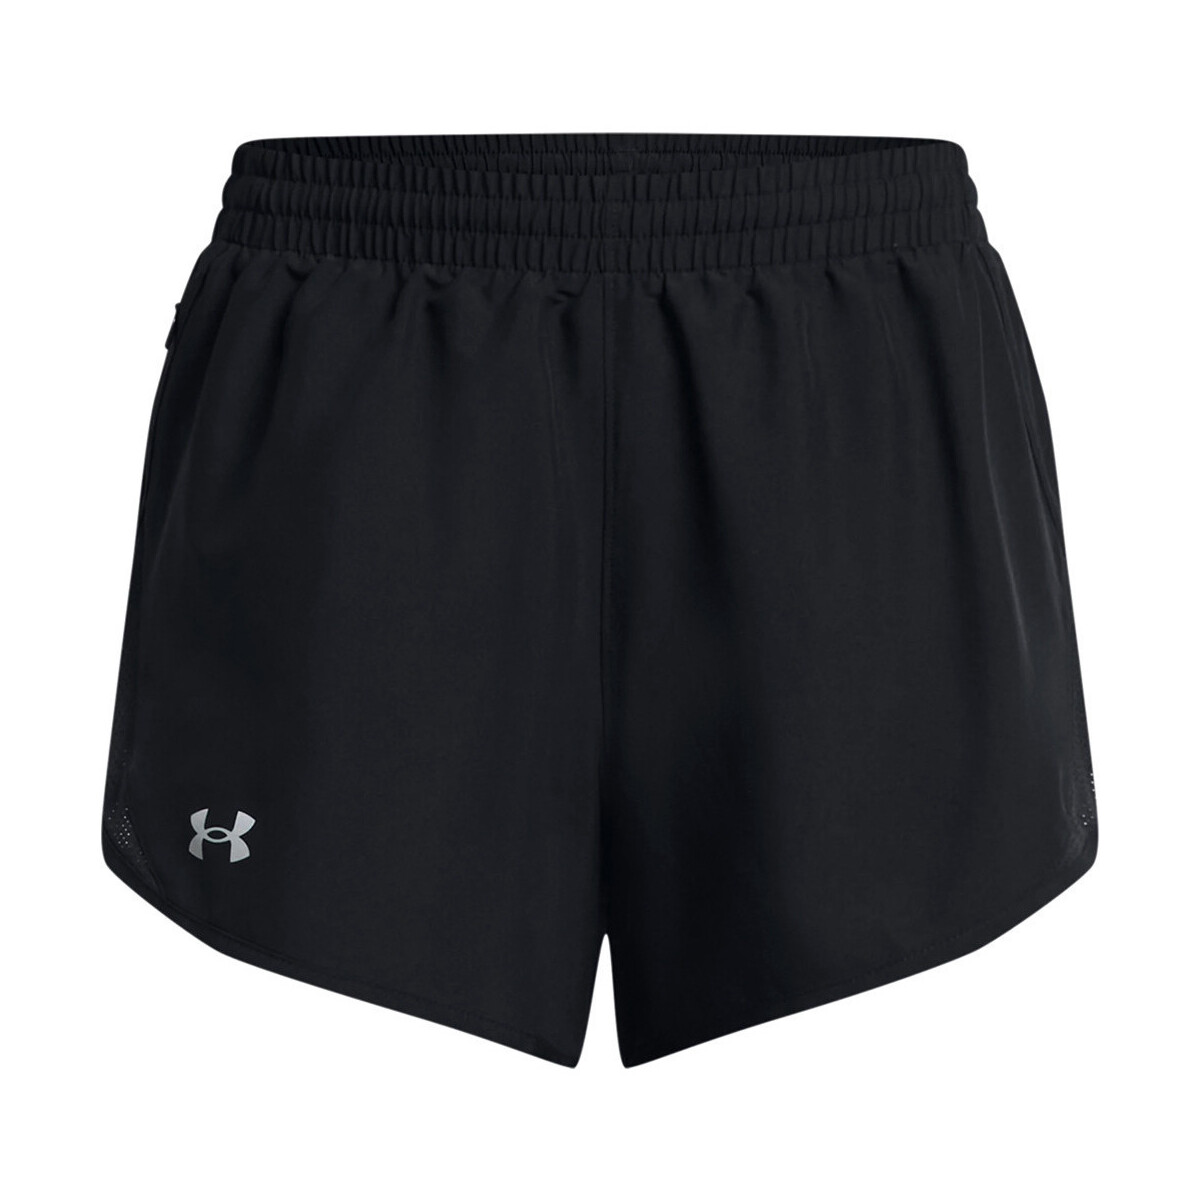 textil Mujer Pantalones cortos Under Armour UA Fly By 3 Shorts Negro